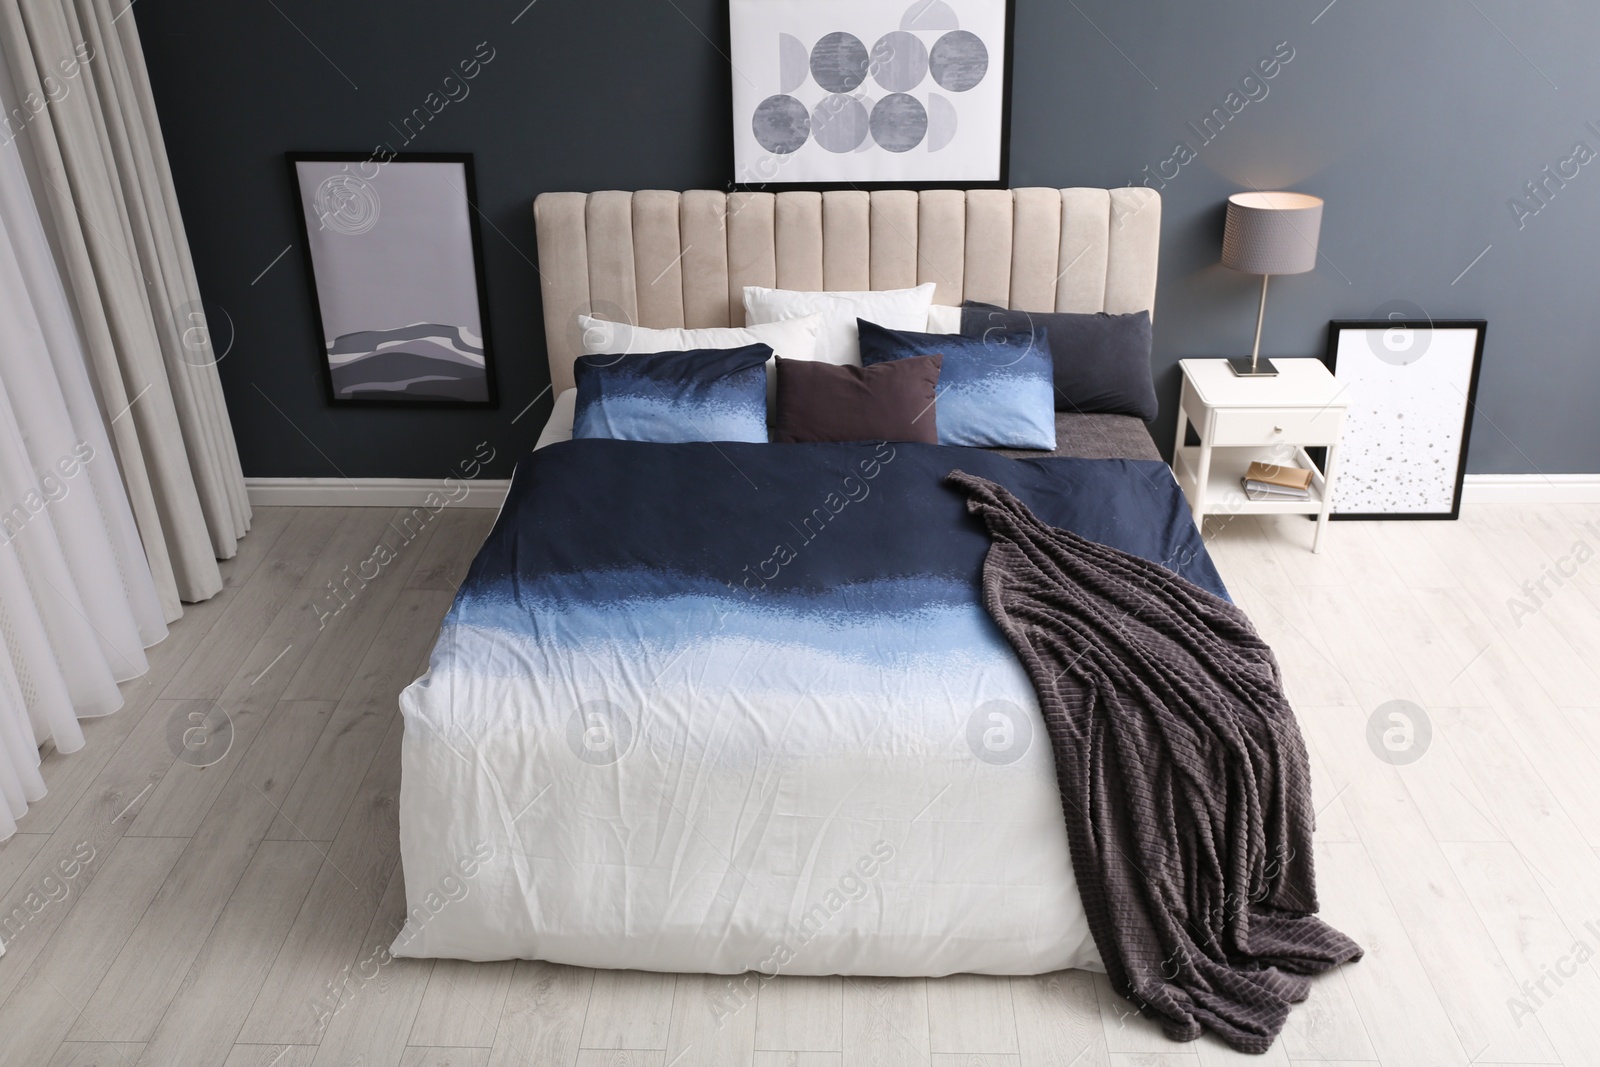 Photo of Comfortable bed with pillows and soft blanket in room. Stylish interior design